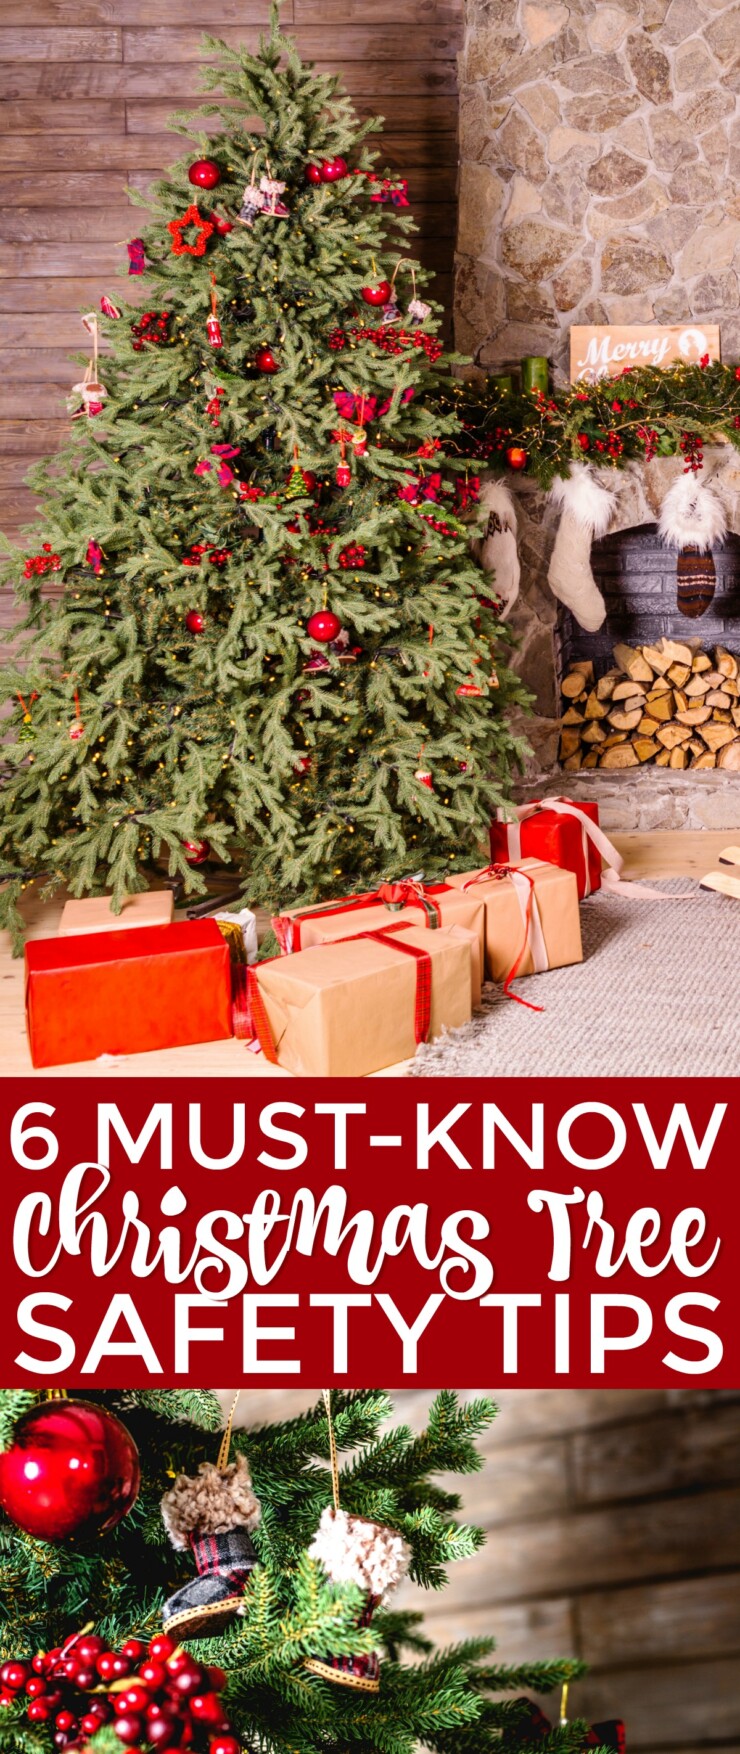 6 Must-Know Christmas Tree Safety Tips